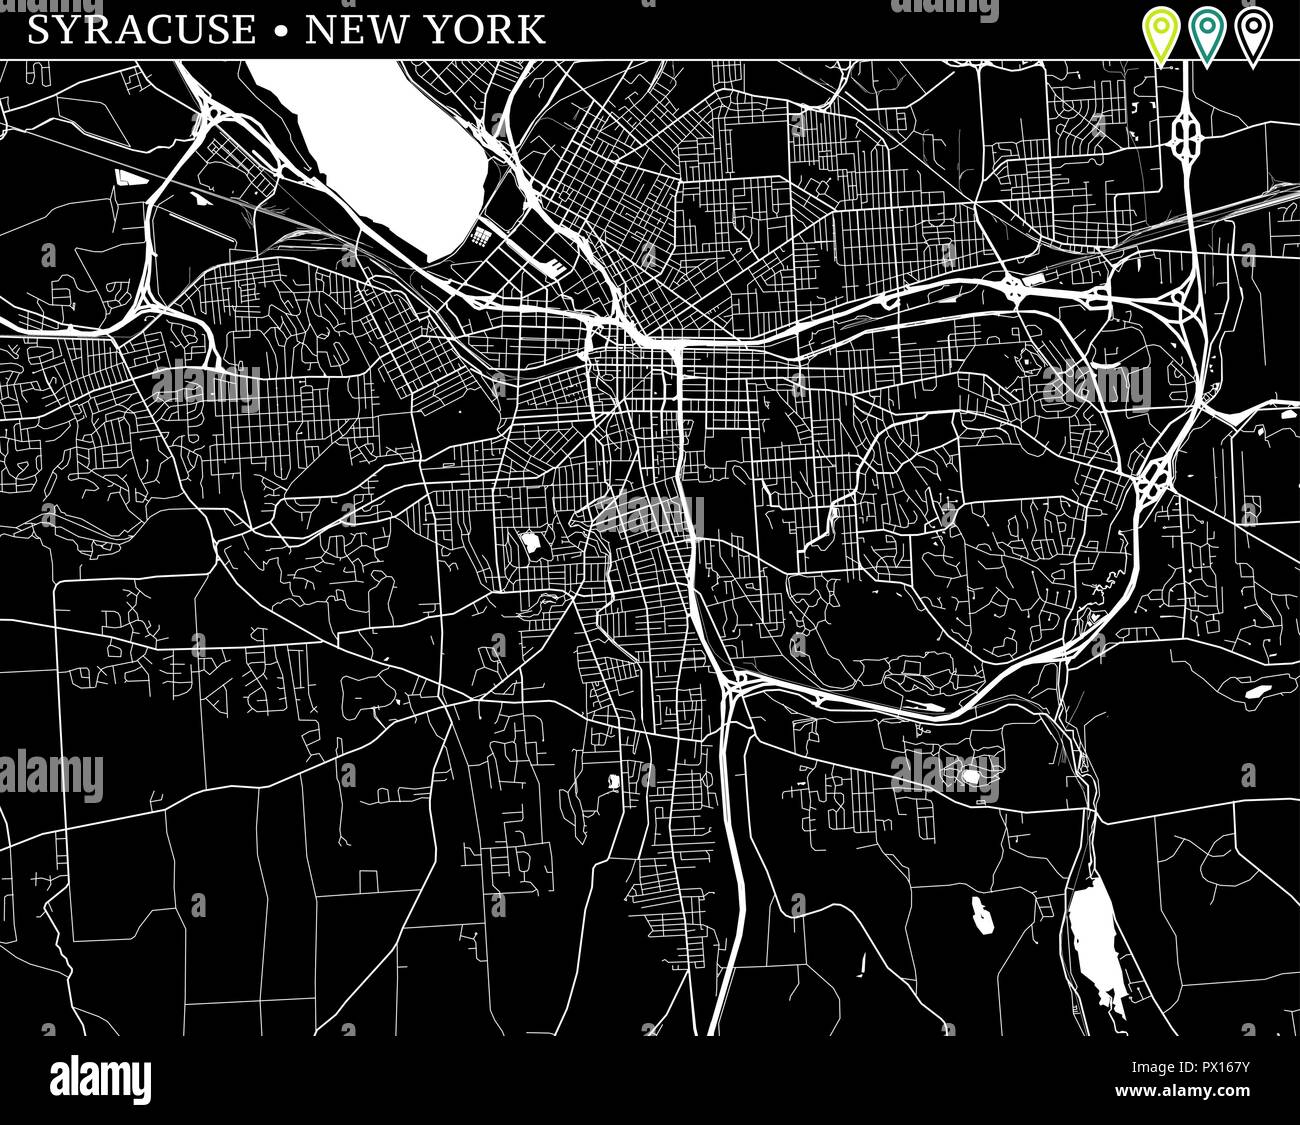 simple map of new york black and white Simple Map Of Syracuse New York Usa Black And White Version For simple map of new york black and white